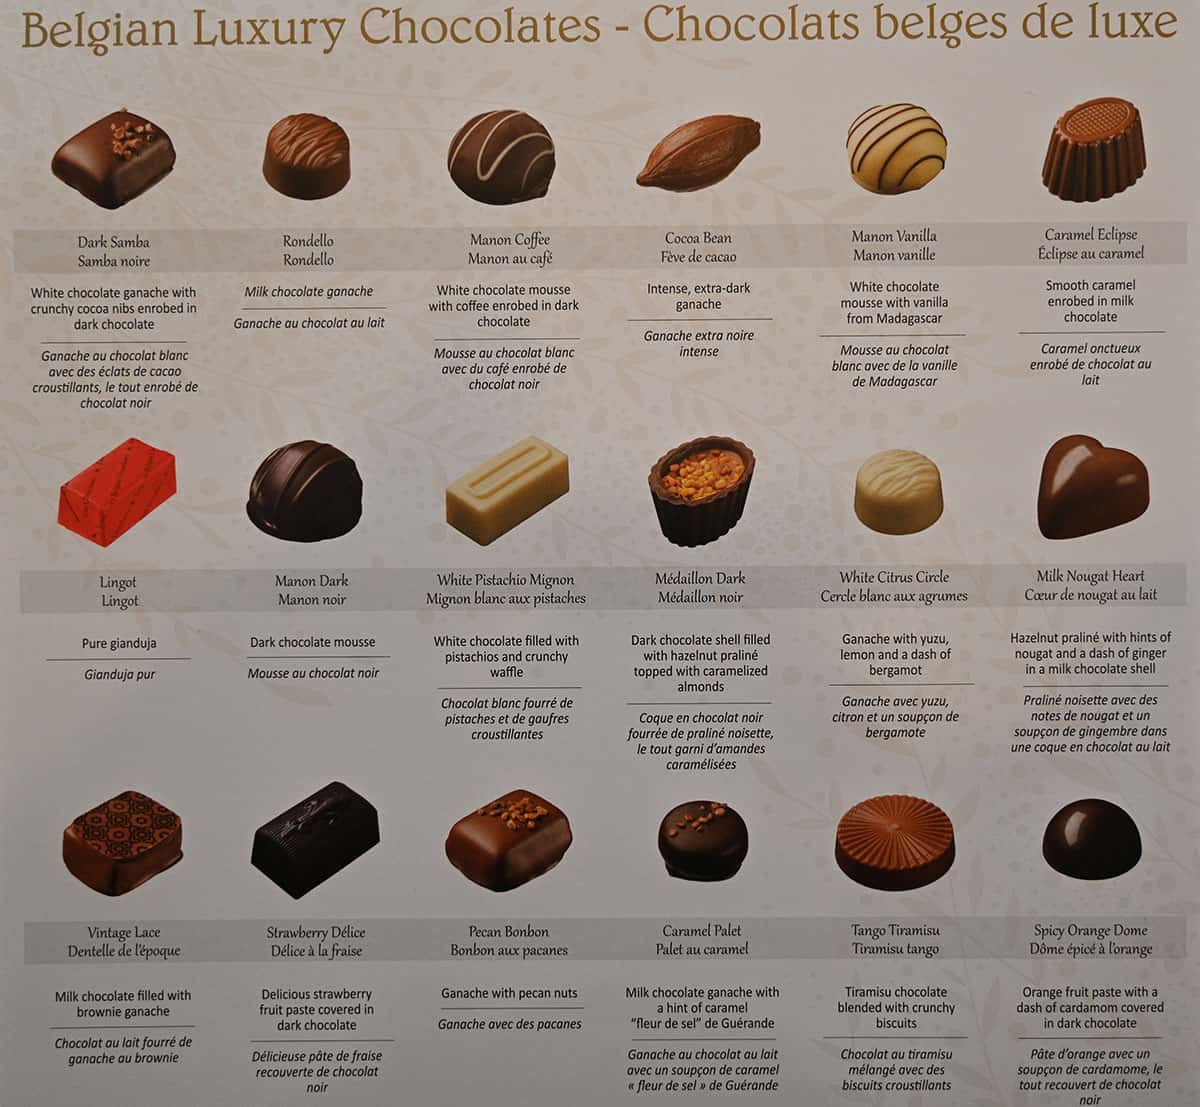 Image of the chocolate guide showing what each kind of chocolate in the box is.